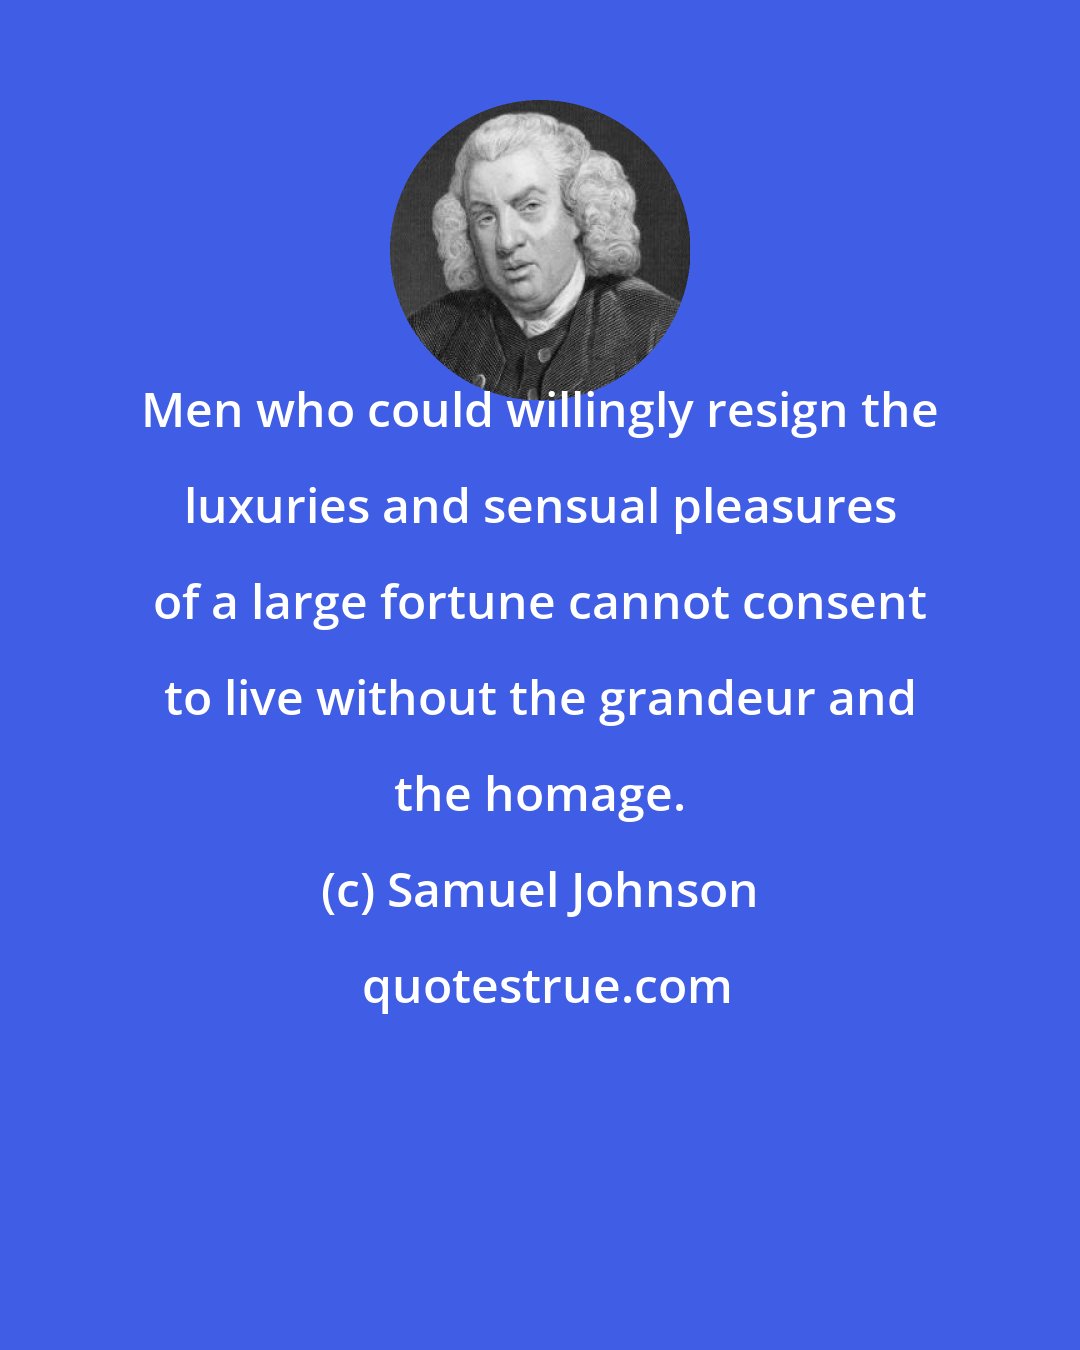 Samuel Johnson: Men who could willingly resign the luxuries and sensual pleasures of a large fortune cannot consent to live without the grandeur and the homage.